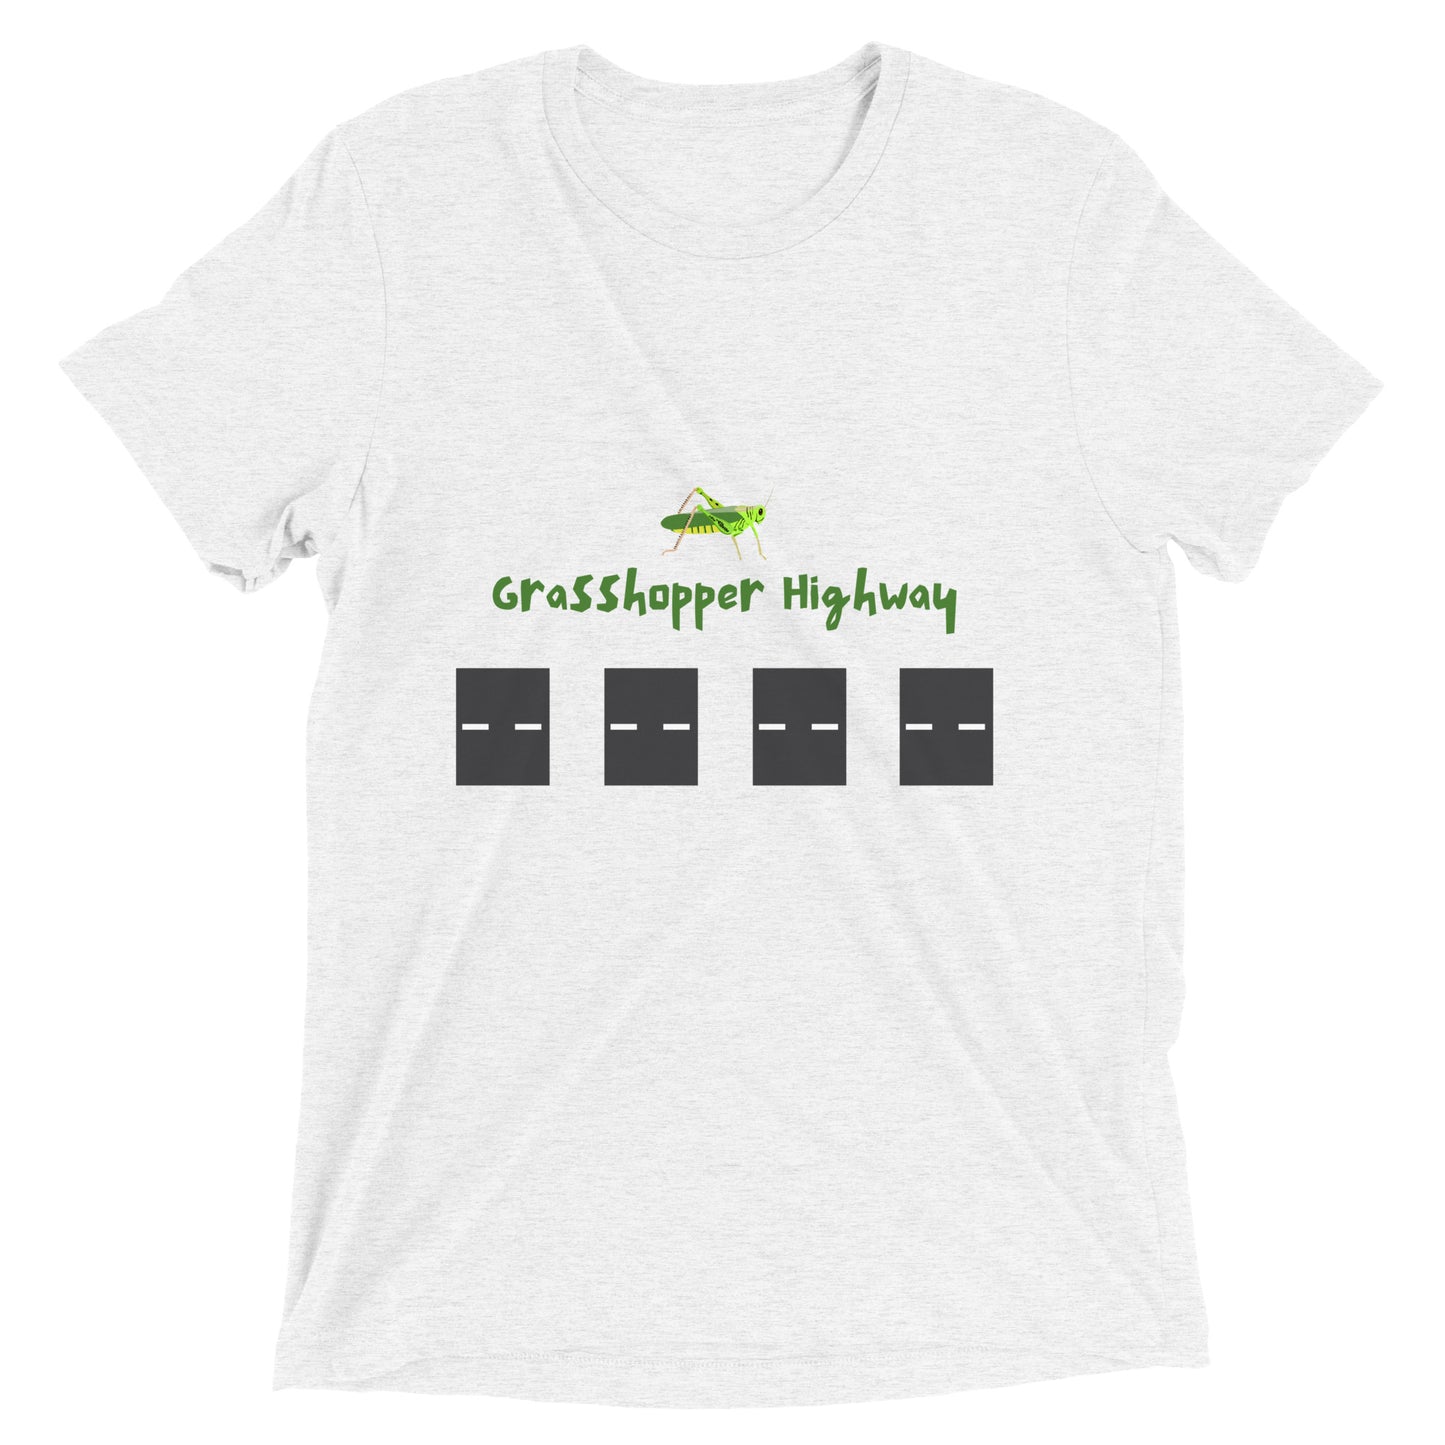 Grasshopper Highway, Hopping in Style, Funny, T-shirt, Animal, Style, Witty, Custom highway, Live like a king, Individuality, Freedom